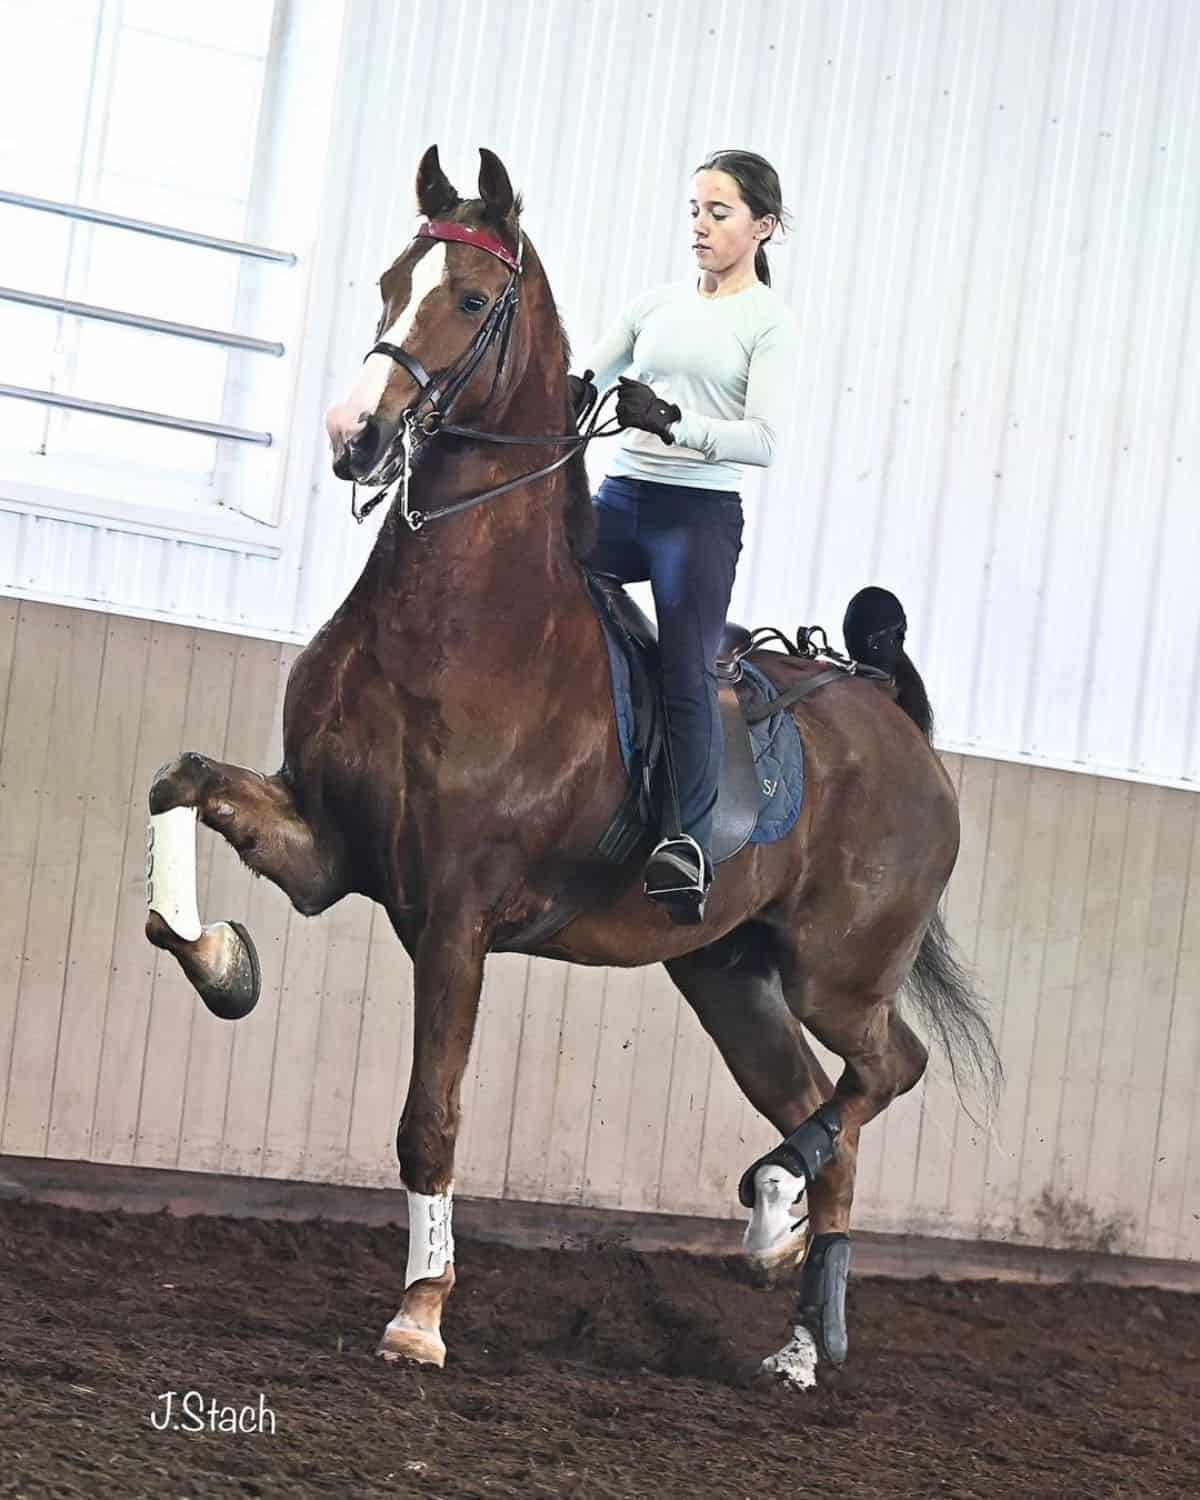 A young woman rides a brown horse.